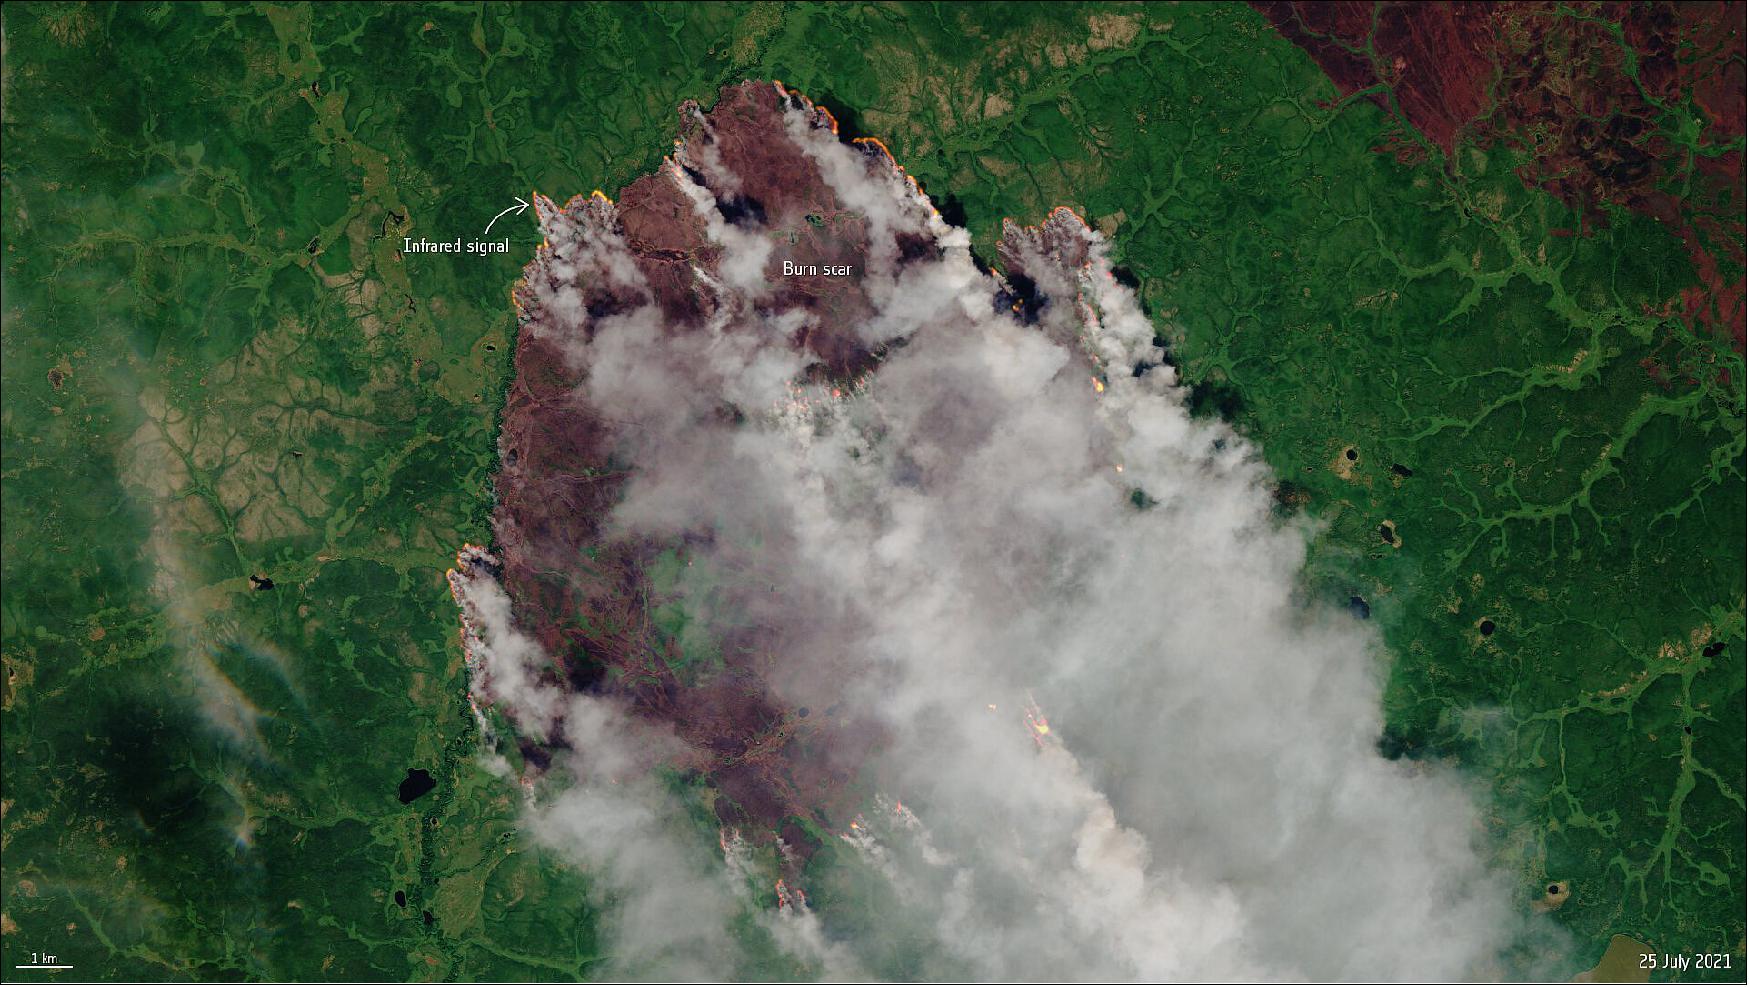 Figure 26: This image captured by the Copernicus Sentinel-2 mission shows one of the many forest fires in the Sakha Republic, Siberia, on 25 July 2021. The image has been processed using the mission's shortwave-infrared band to identify the active fires. Large clouds of smoke can be seen blowing in a southeast direction, while burn scars are visible in dark brown (image credit: ESA, the image contains modified Copernicus Sentinel data (2021), processed by ESA, CC BY-SA 3.0 IGO) 24)